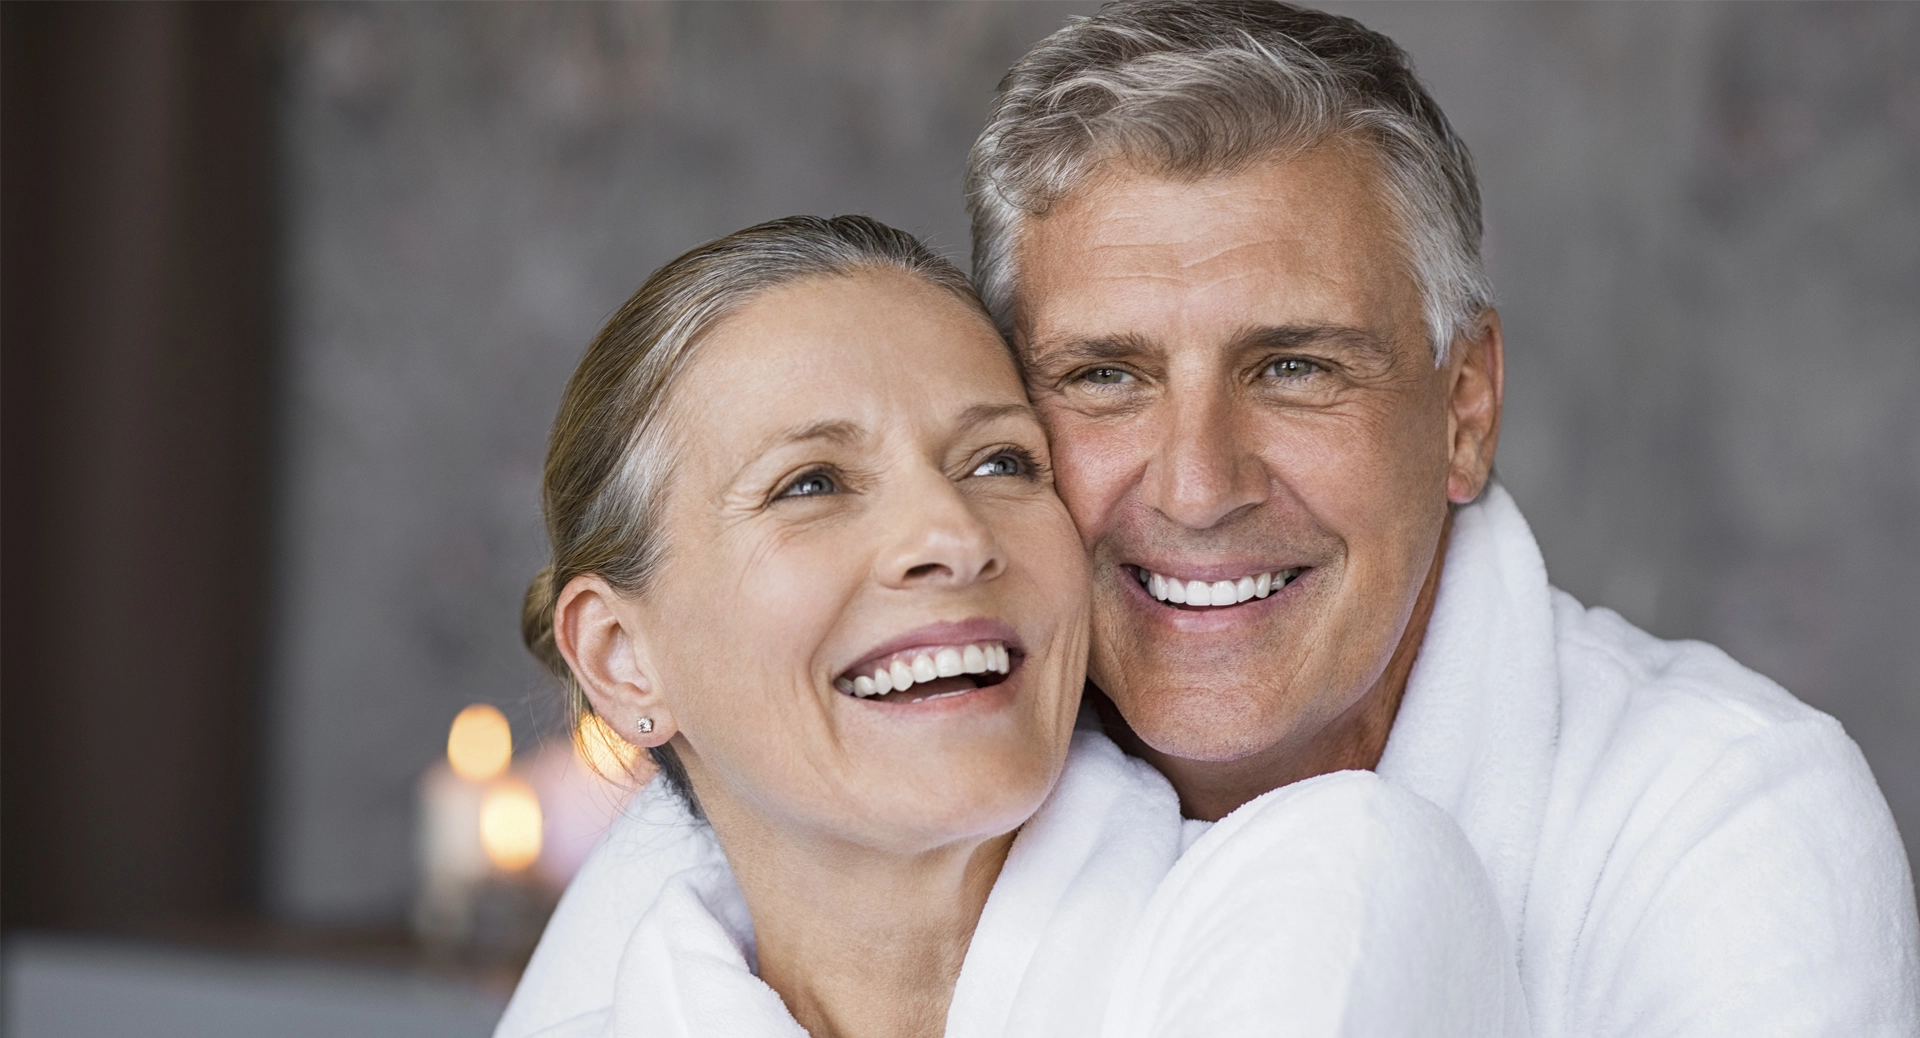 young old couple smiling in white dress